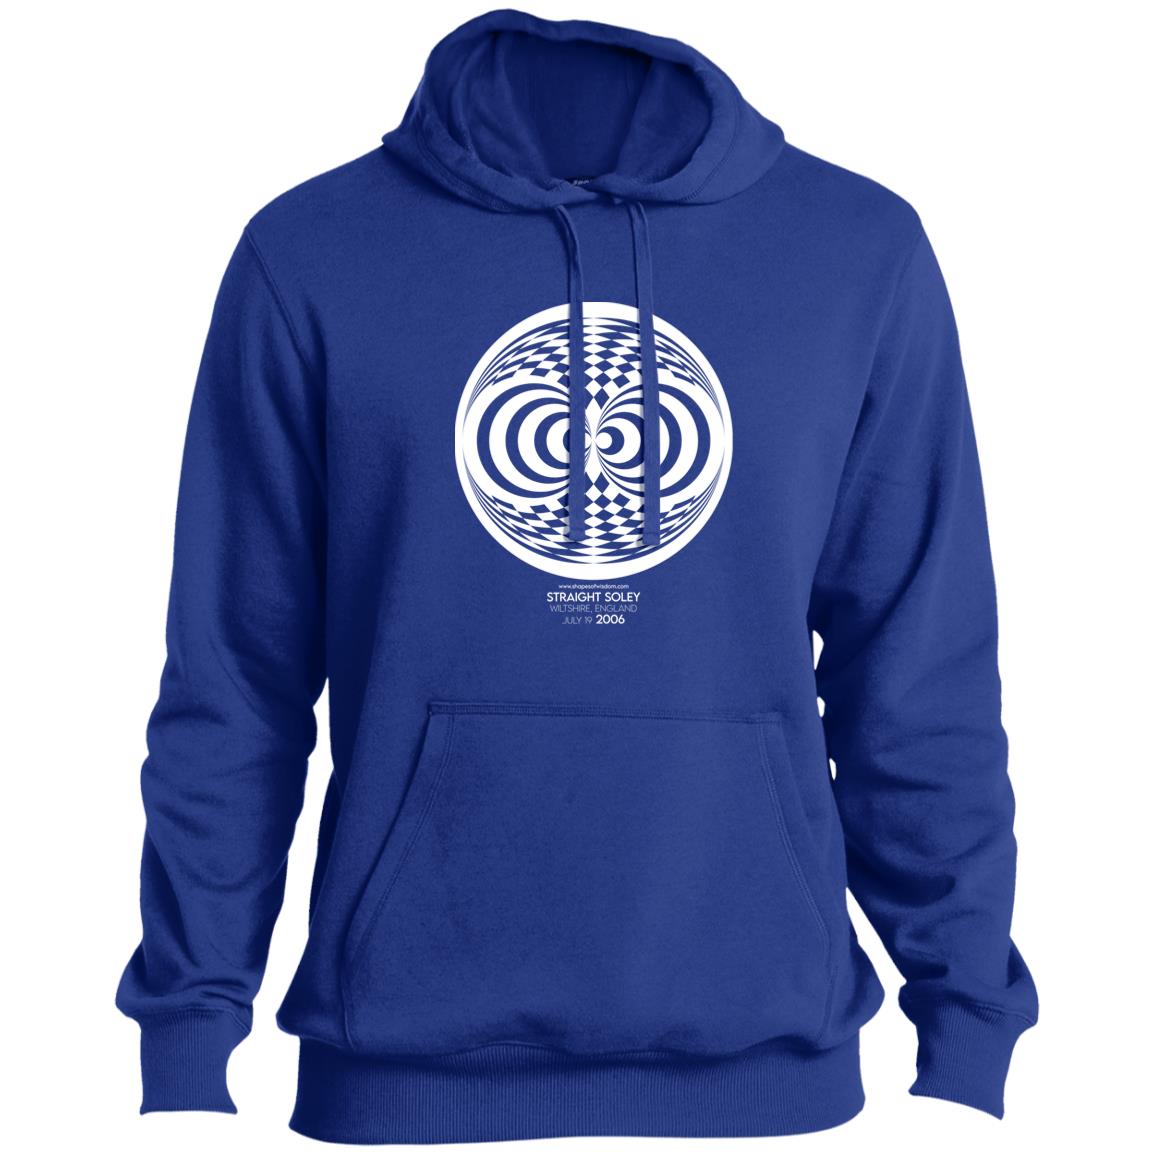 Crop Circle Pullover Hoodie - Straight Soley